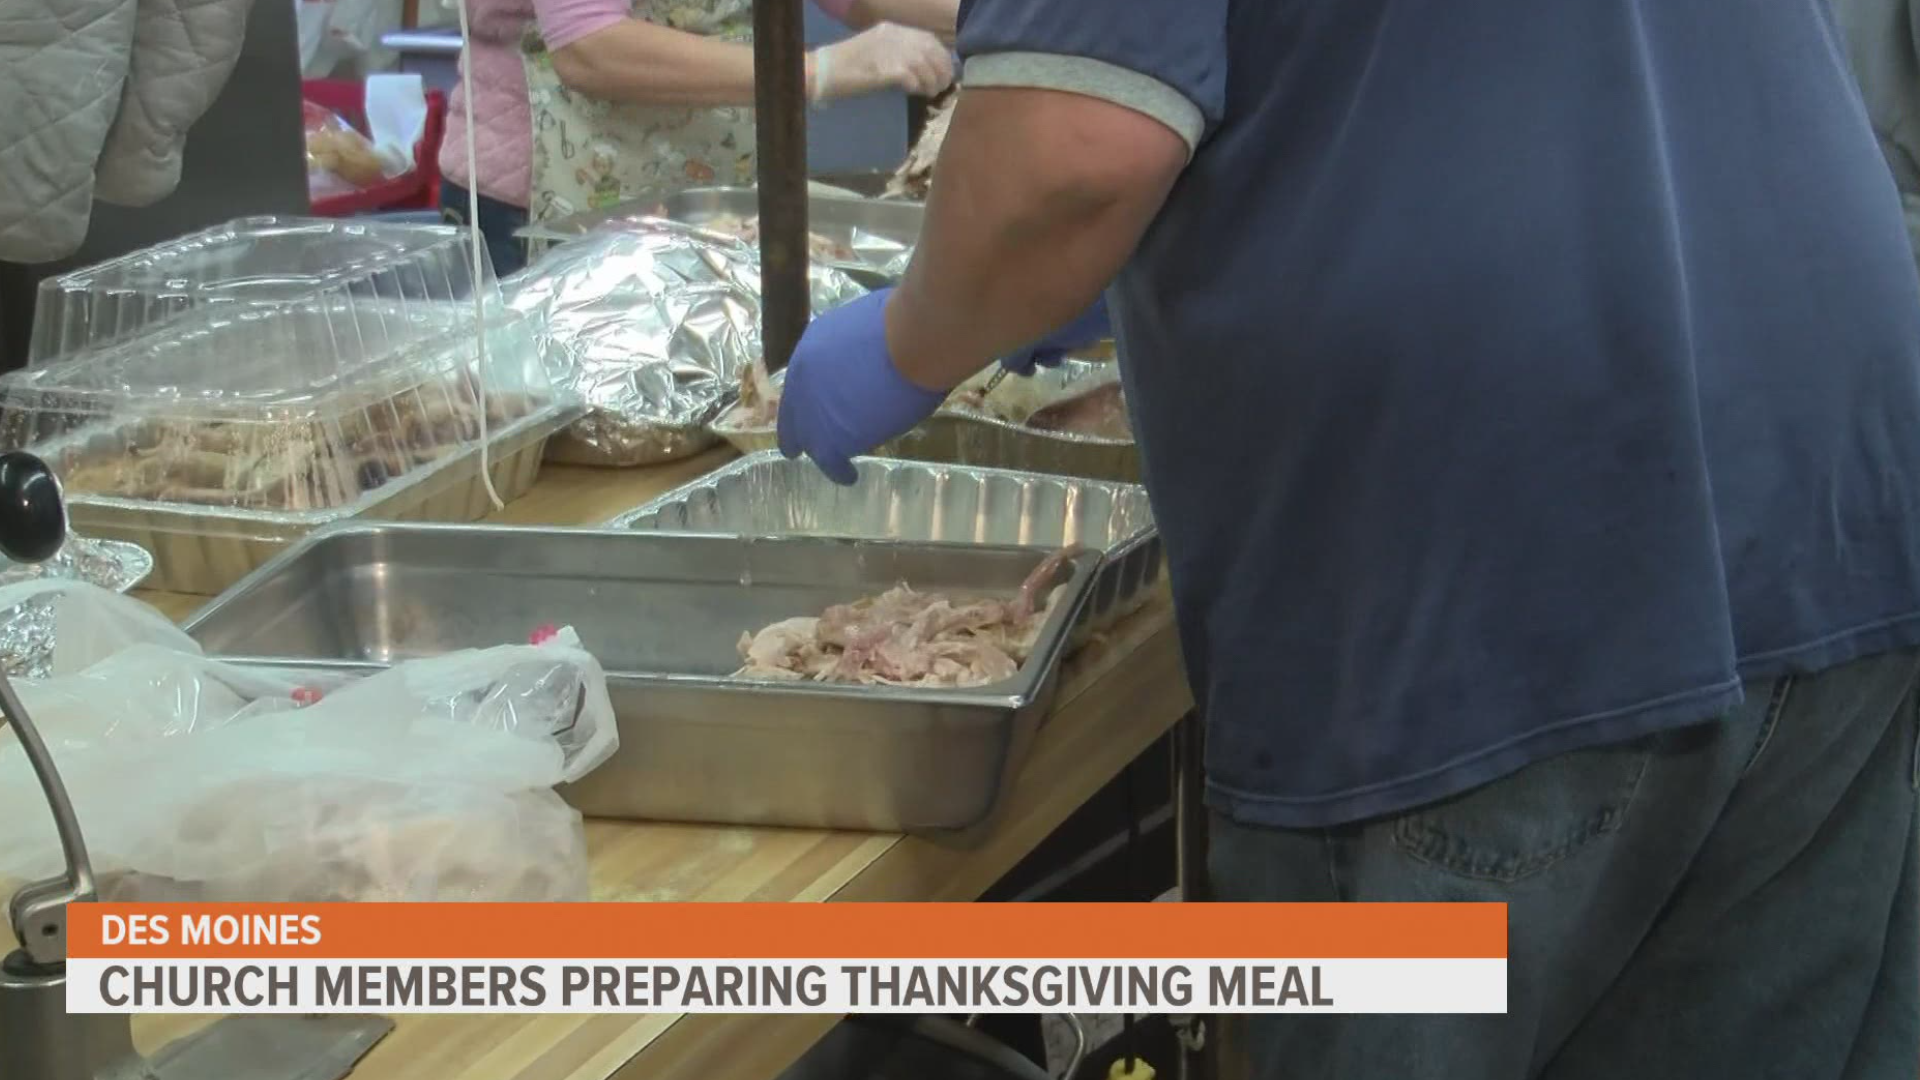 The Thanksgiving dinner drive-thru started at 11:00 a.m. and ended at 1:00 p.m.